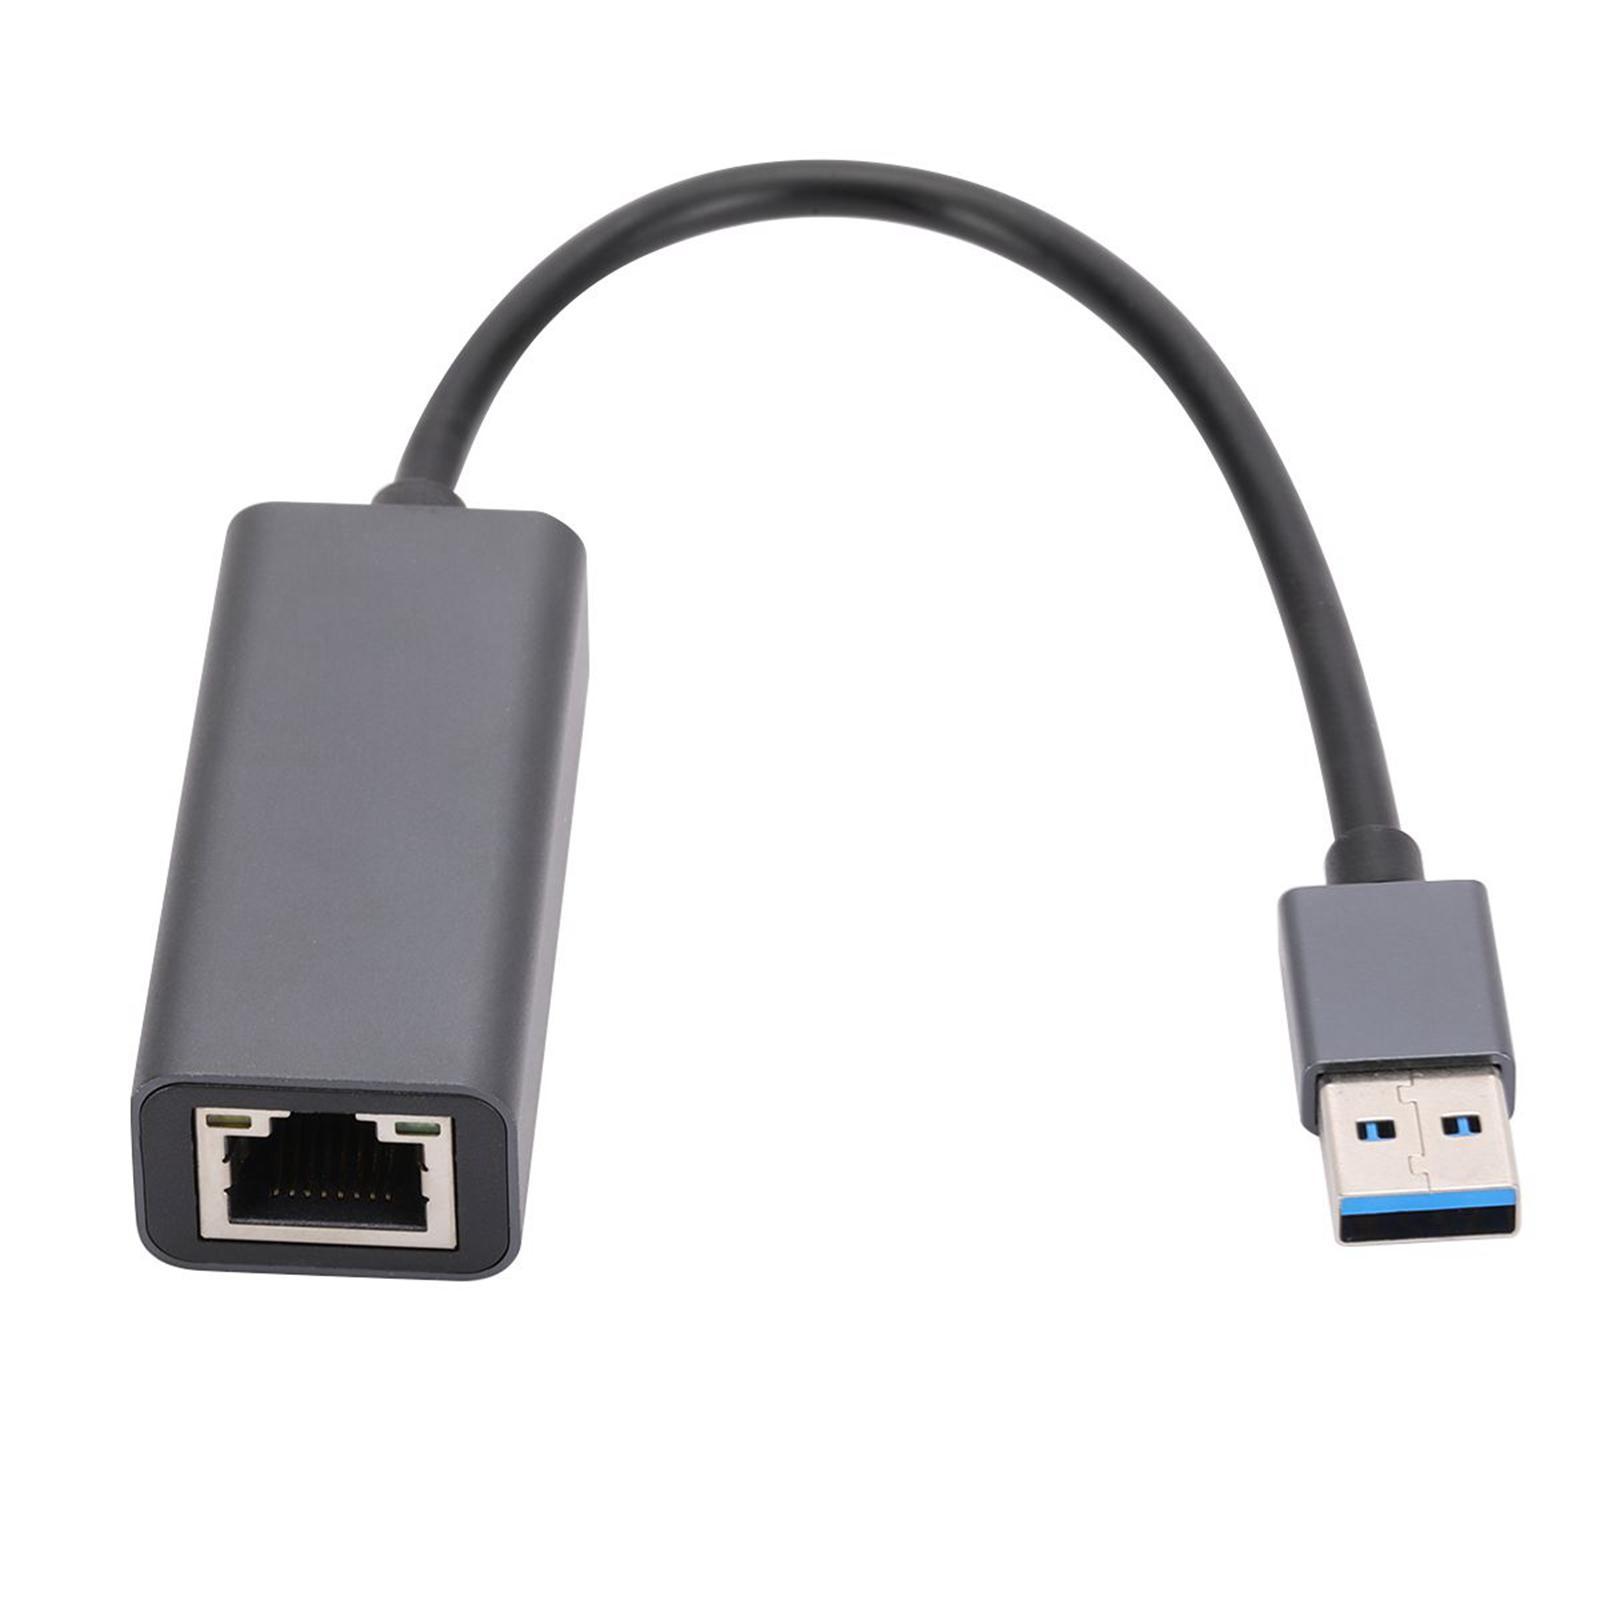 USB Ethernet Adapter Network Adapter 1000Mbps Network Card for Switch PC